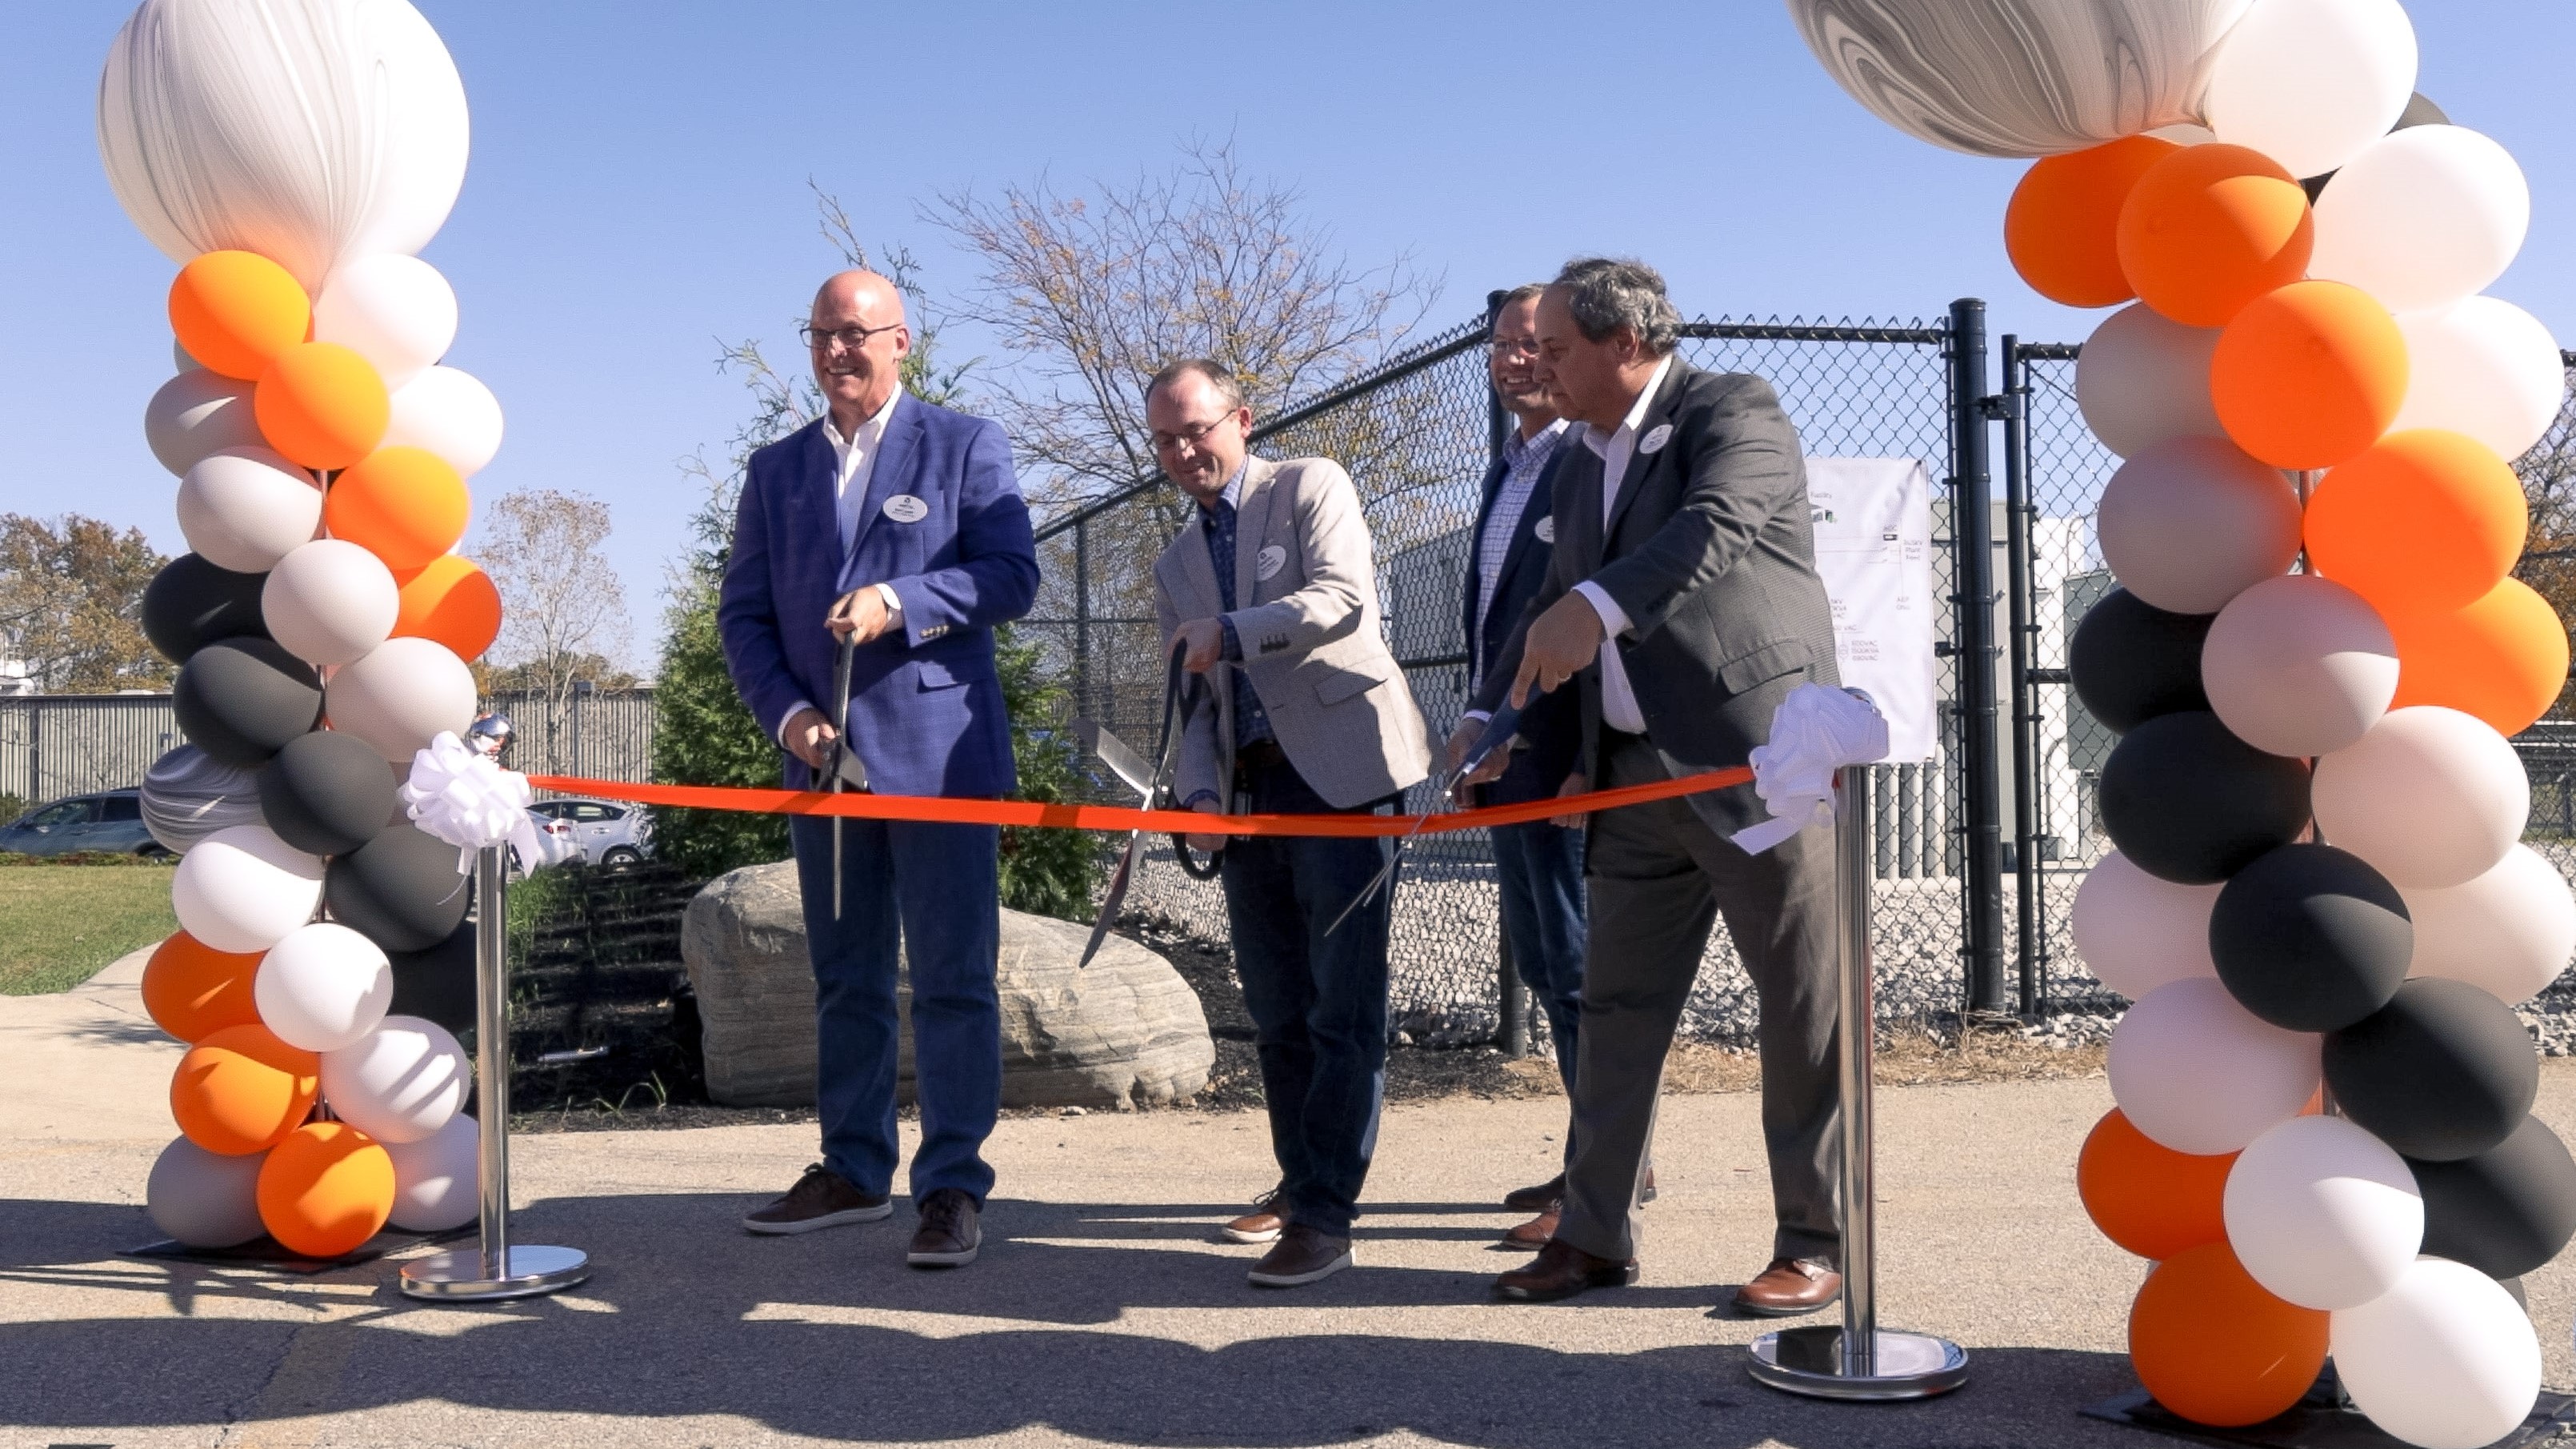 Vertiv Unveils Customer Experience Center and Data Center Microgrid Installation at Delaware, Ohio Facility